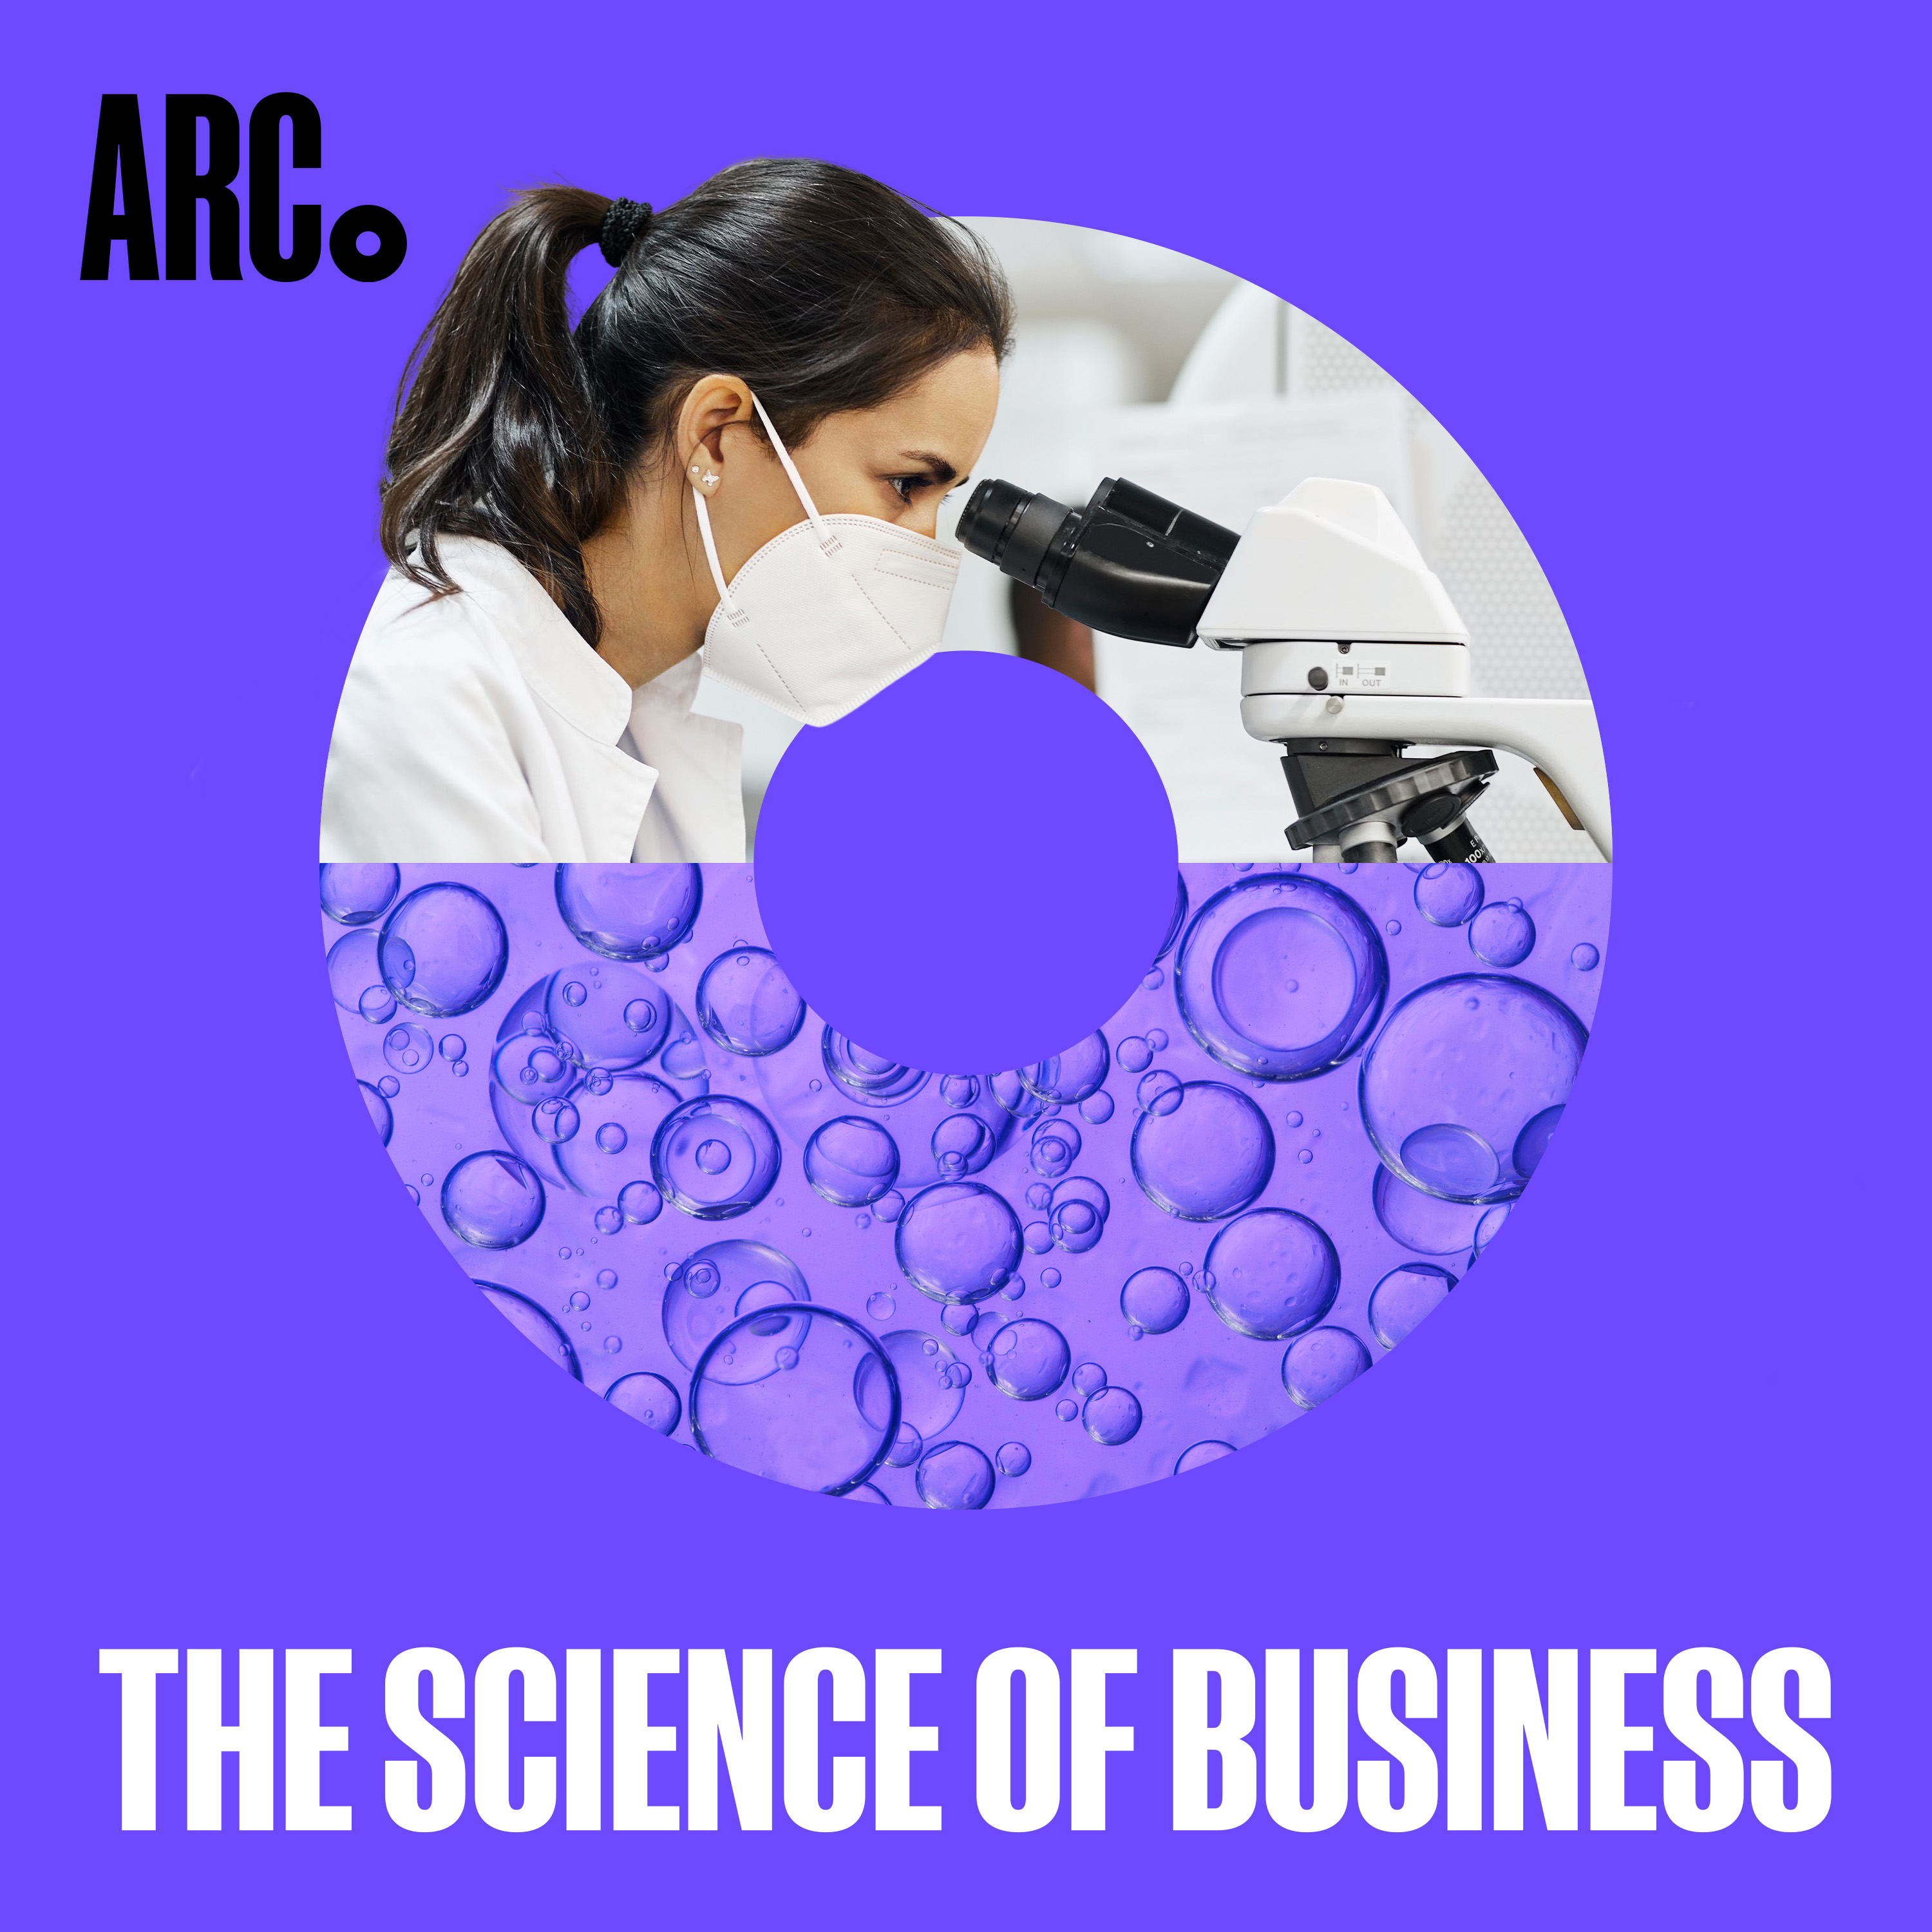 The Science Of Business Trailer